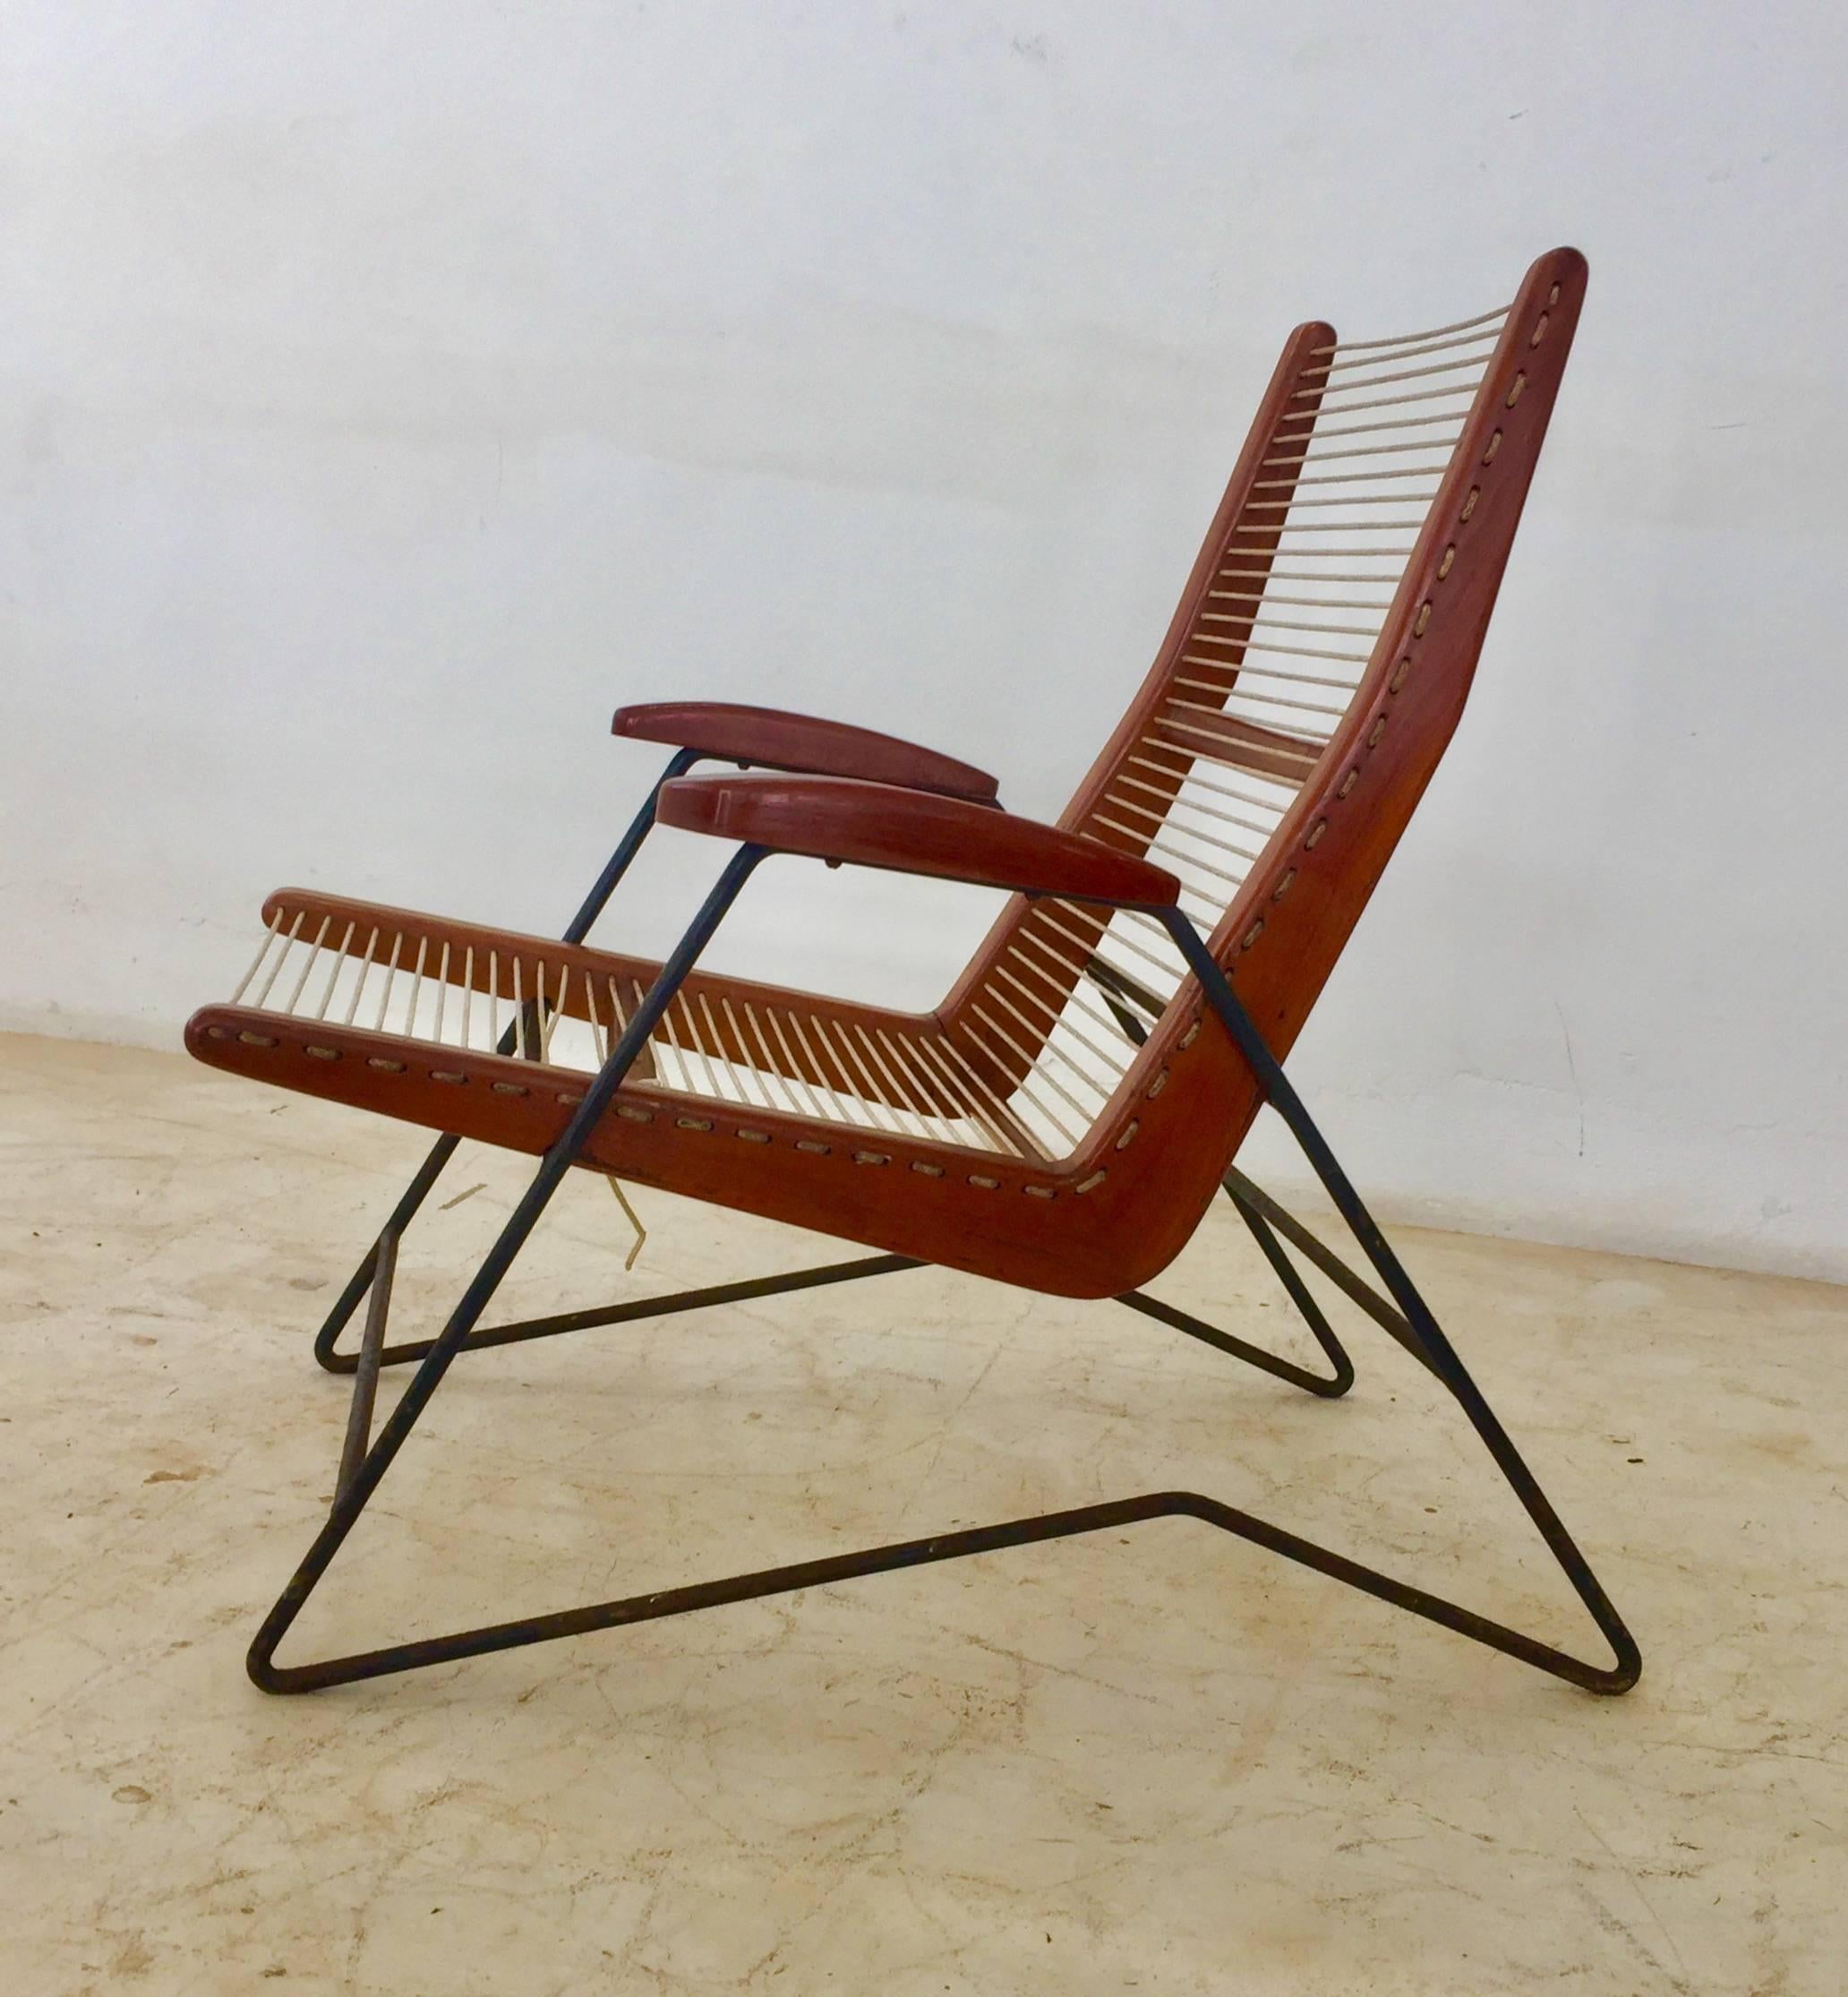 Metalwork Mid-Century Modern Armchair with Iron Structure and Wood and String Seat